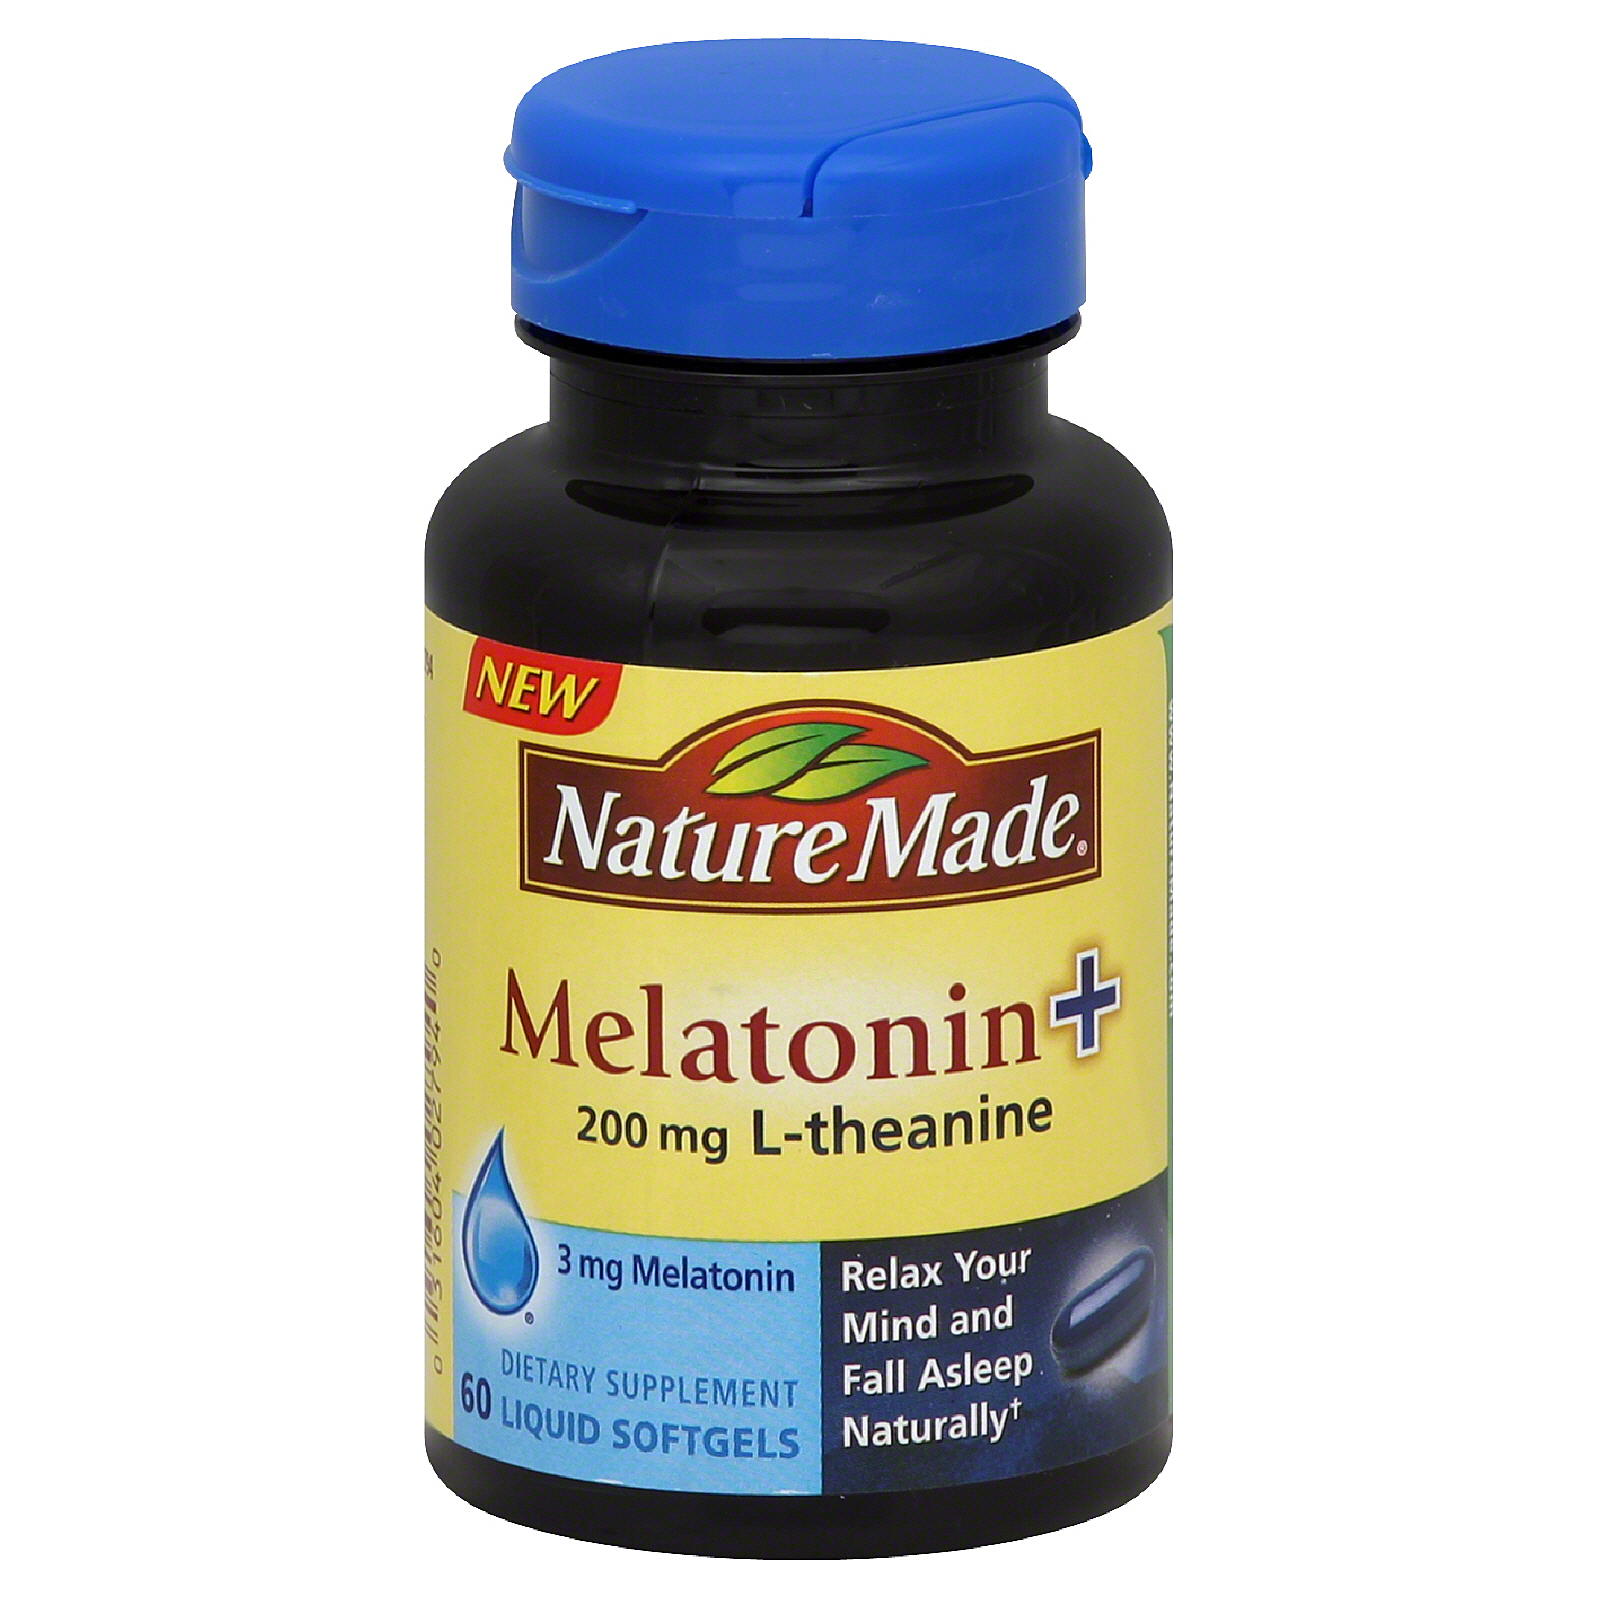 Nature Made Melatonin + with 200 Mg L-Theanine, 60 Softgels